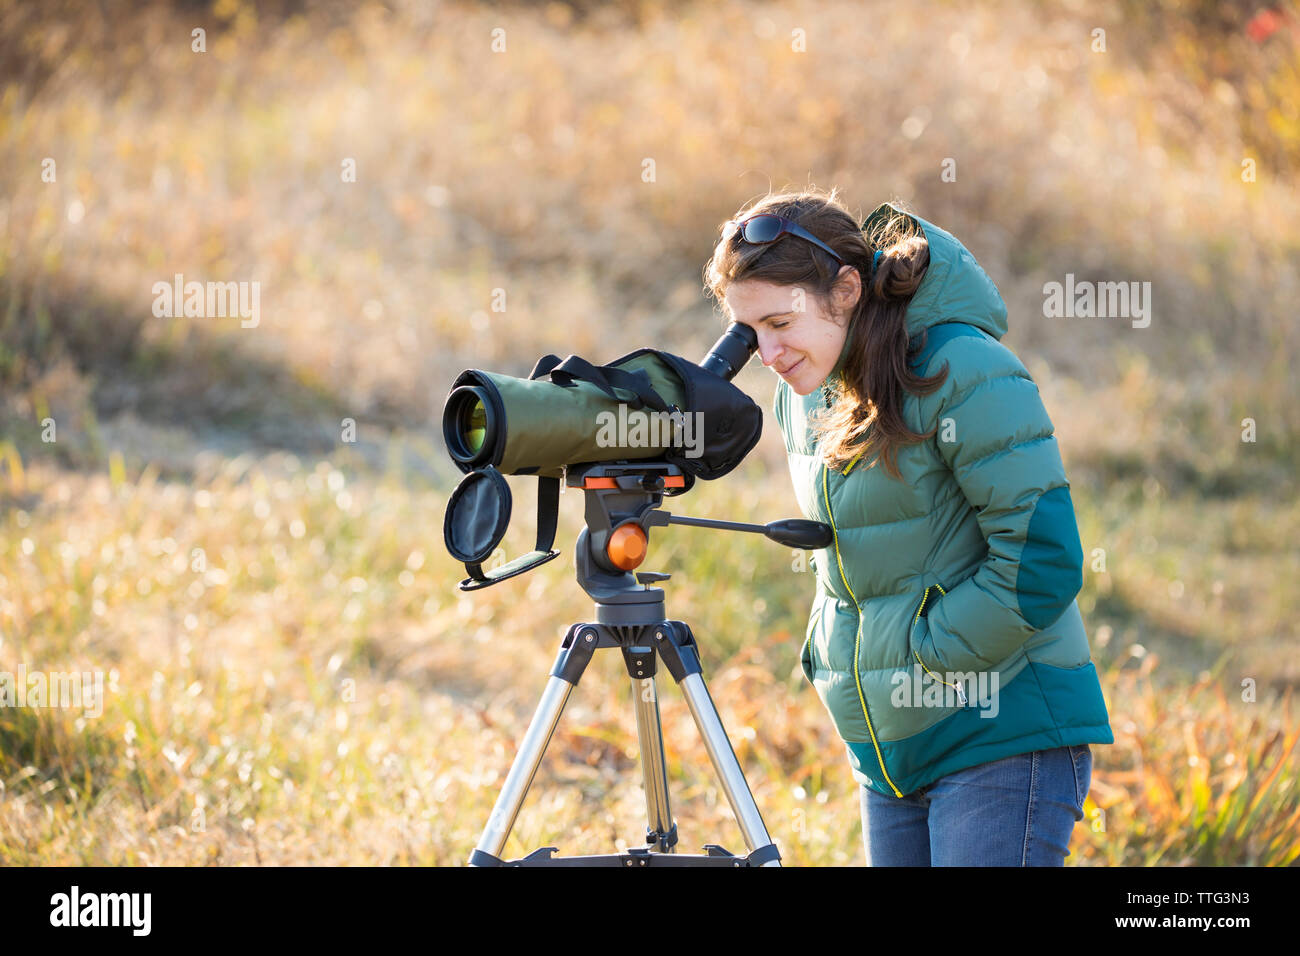 Giovane donna bird watching con cannocchiale Foto Stock